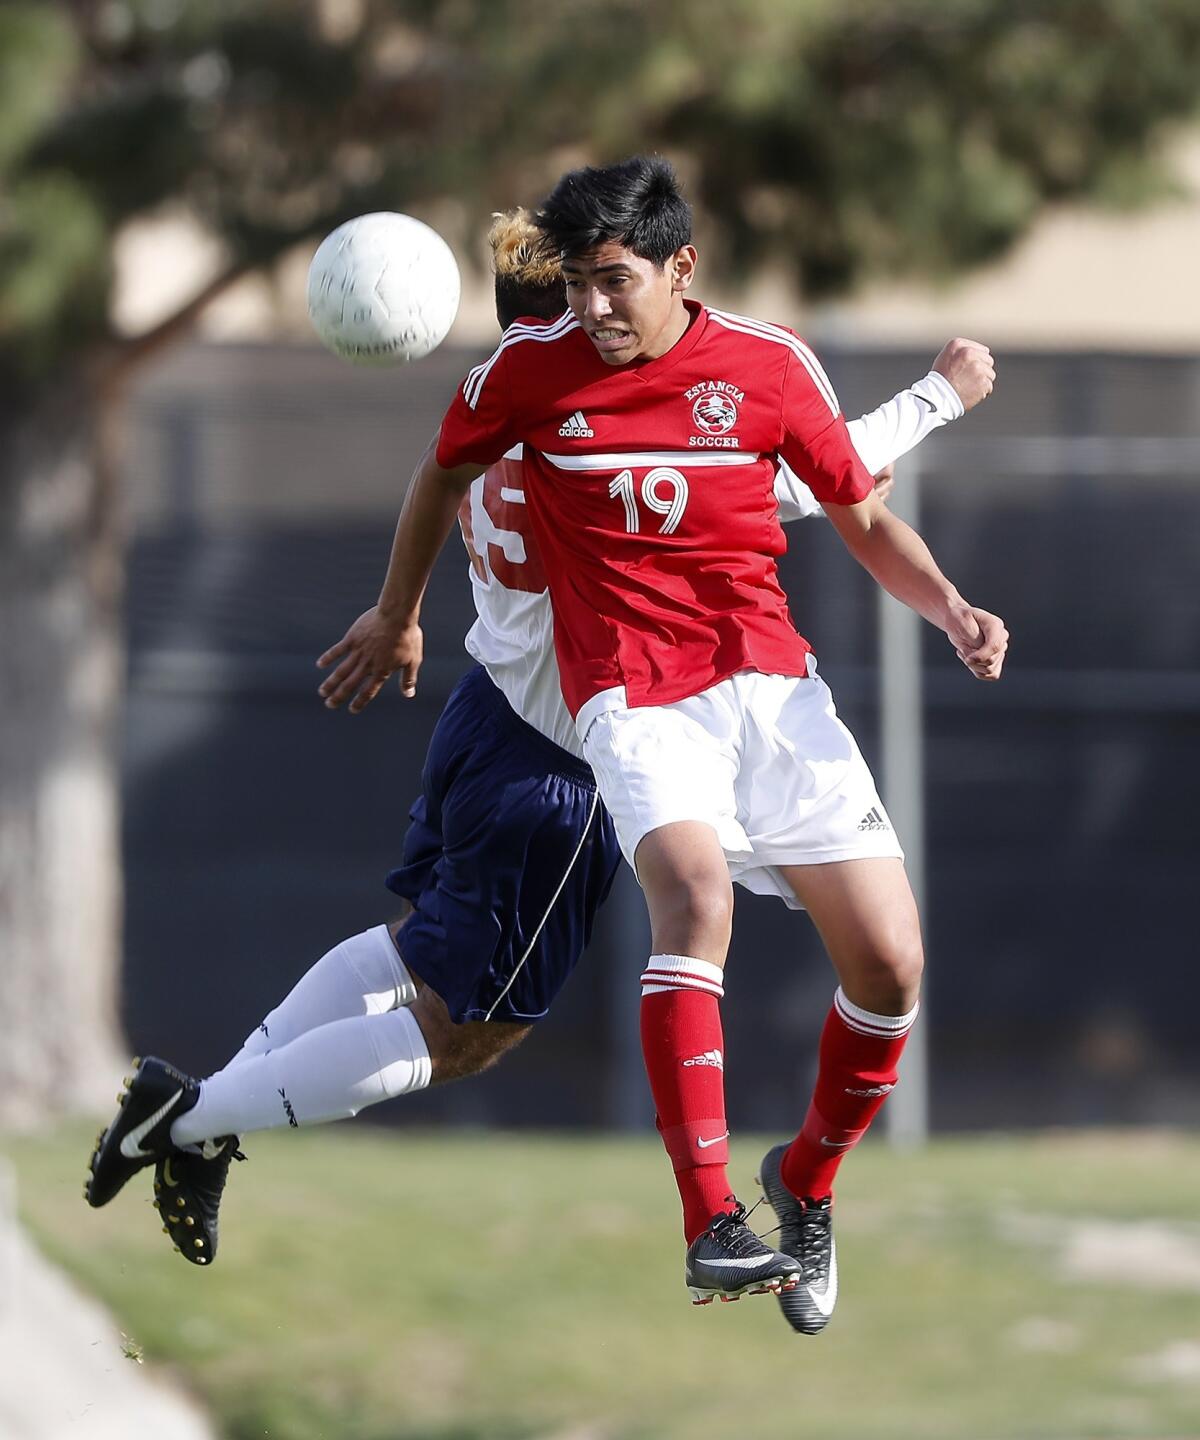 Estancia's Miguel Pena heads the ball in the first half at La Quinta in the second round of the CIF Southern Section Division 3 playoffs on Feb. 21, 2018.